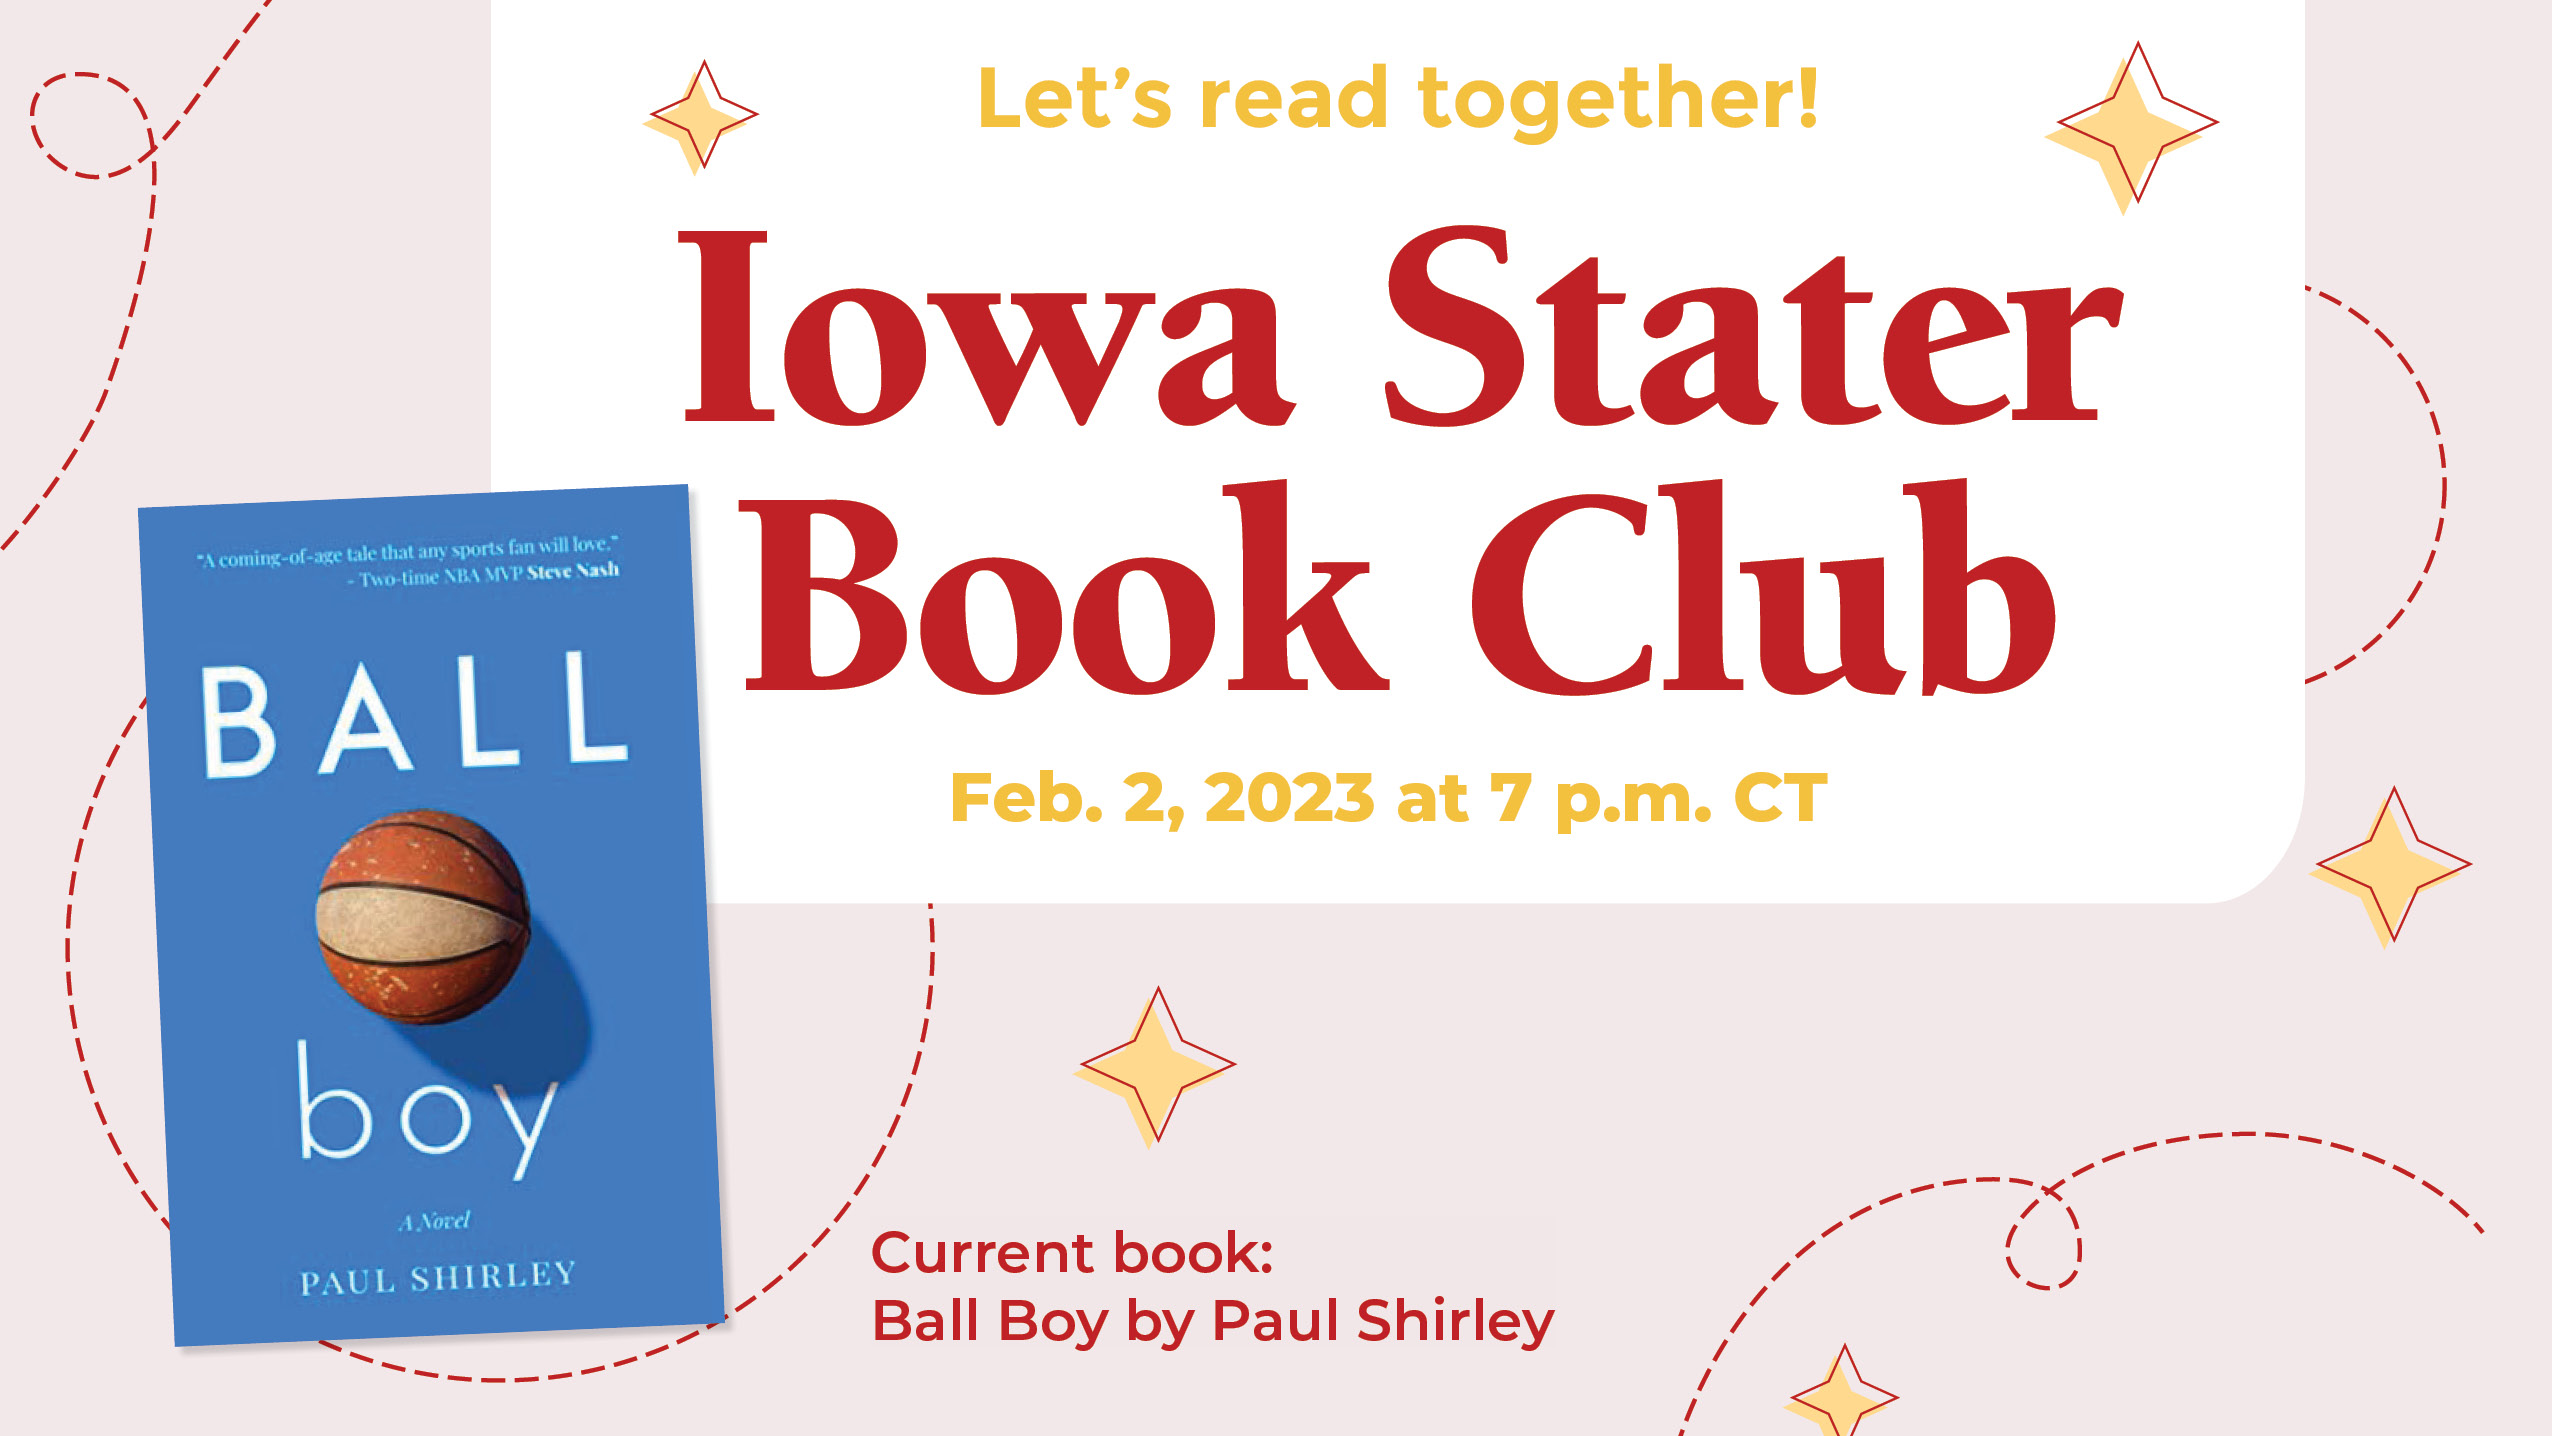 Iowa Stater Book Club graphic with Ball Boy book cover.